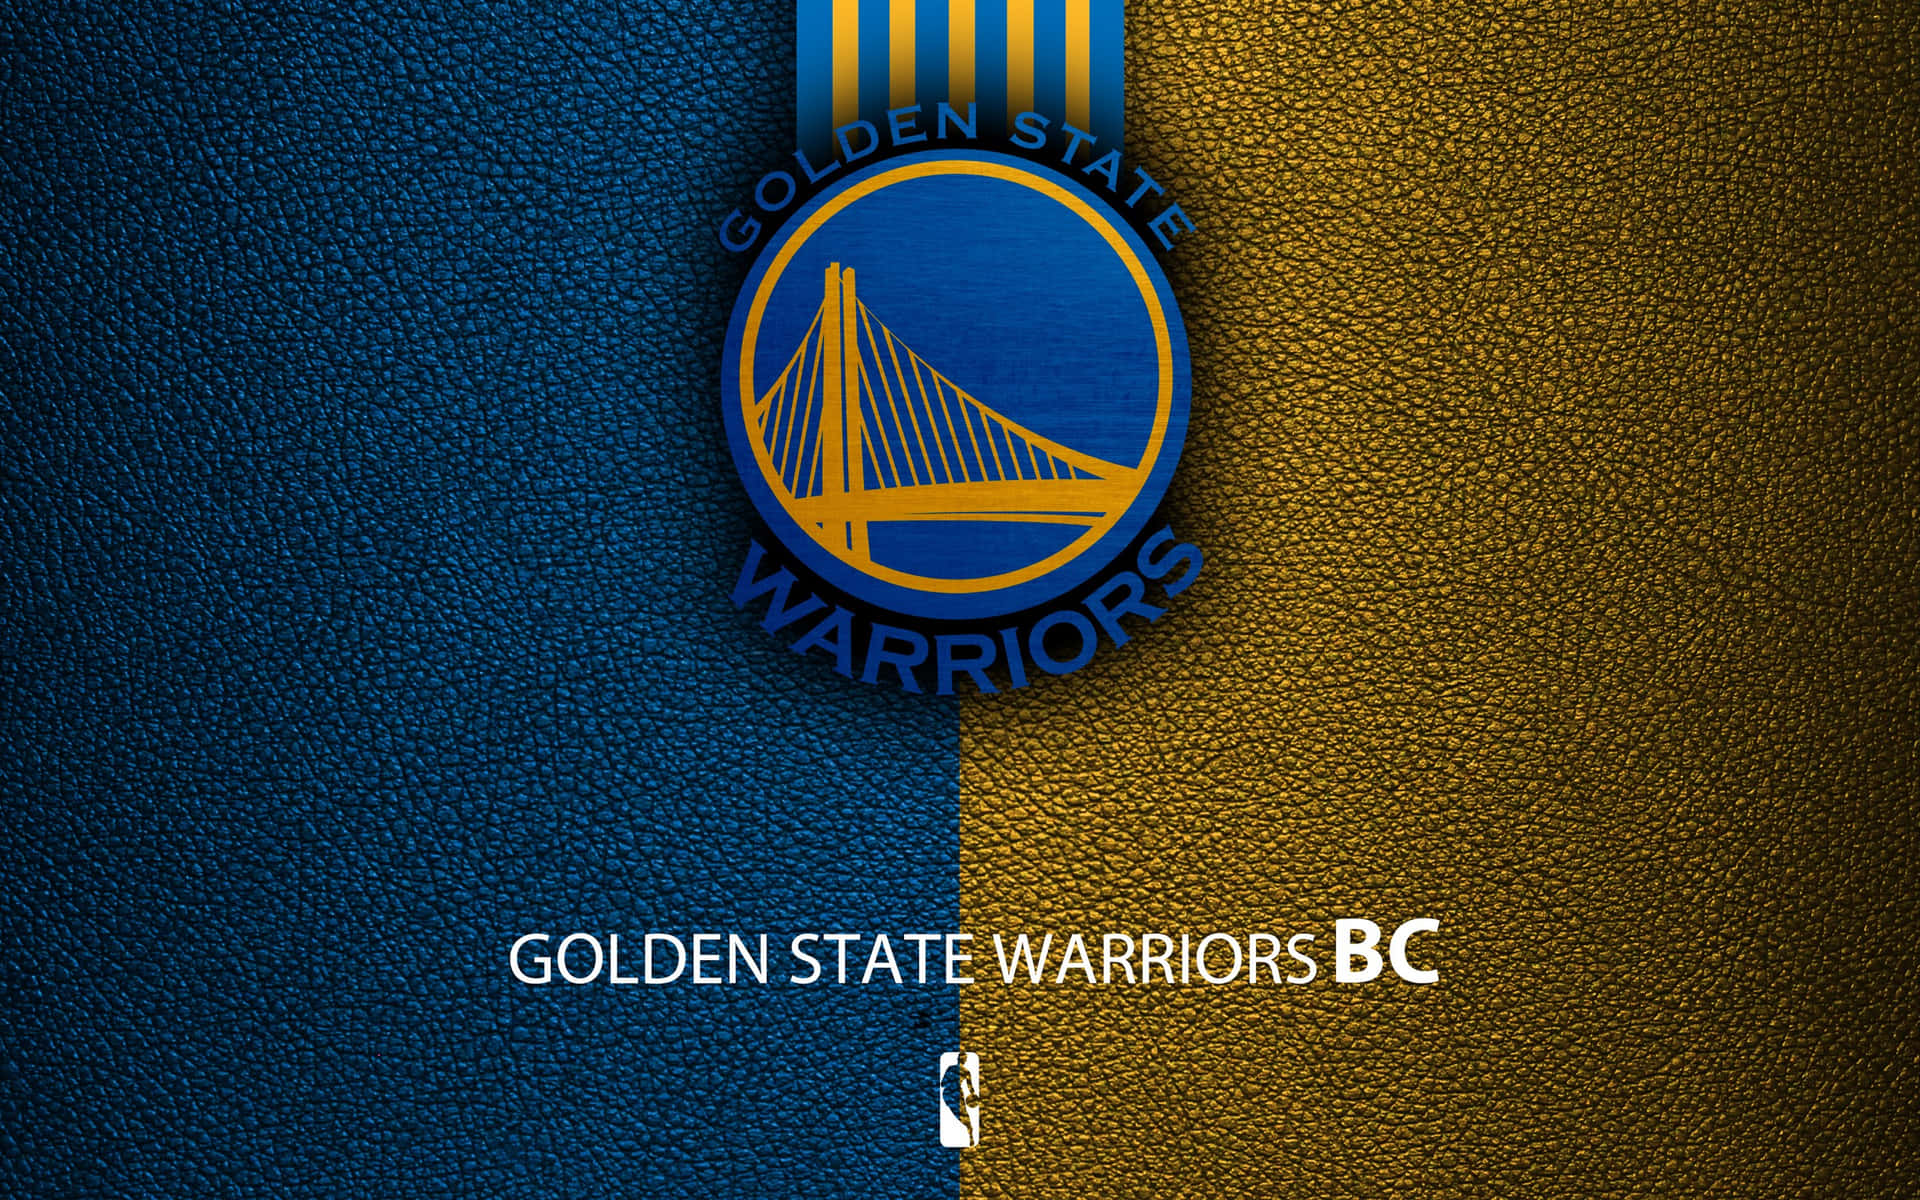 Golden State Warriors Logo On Half Leather Surface Wallpaper